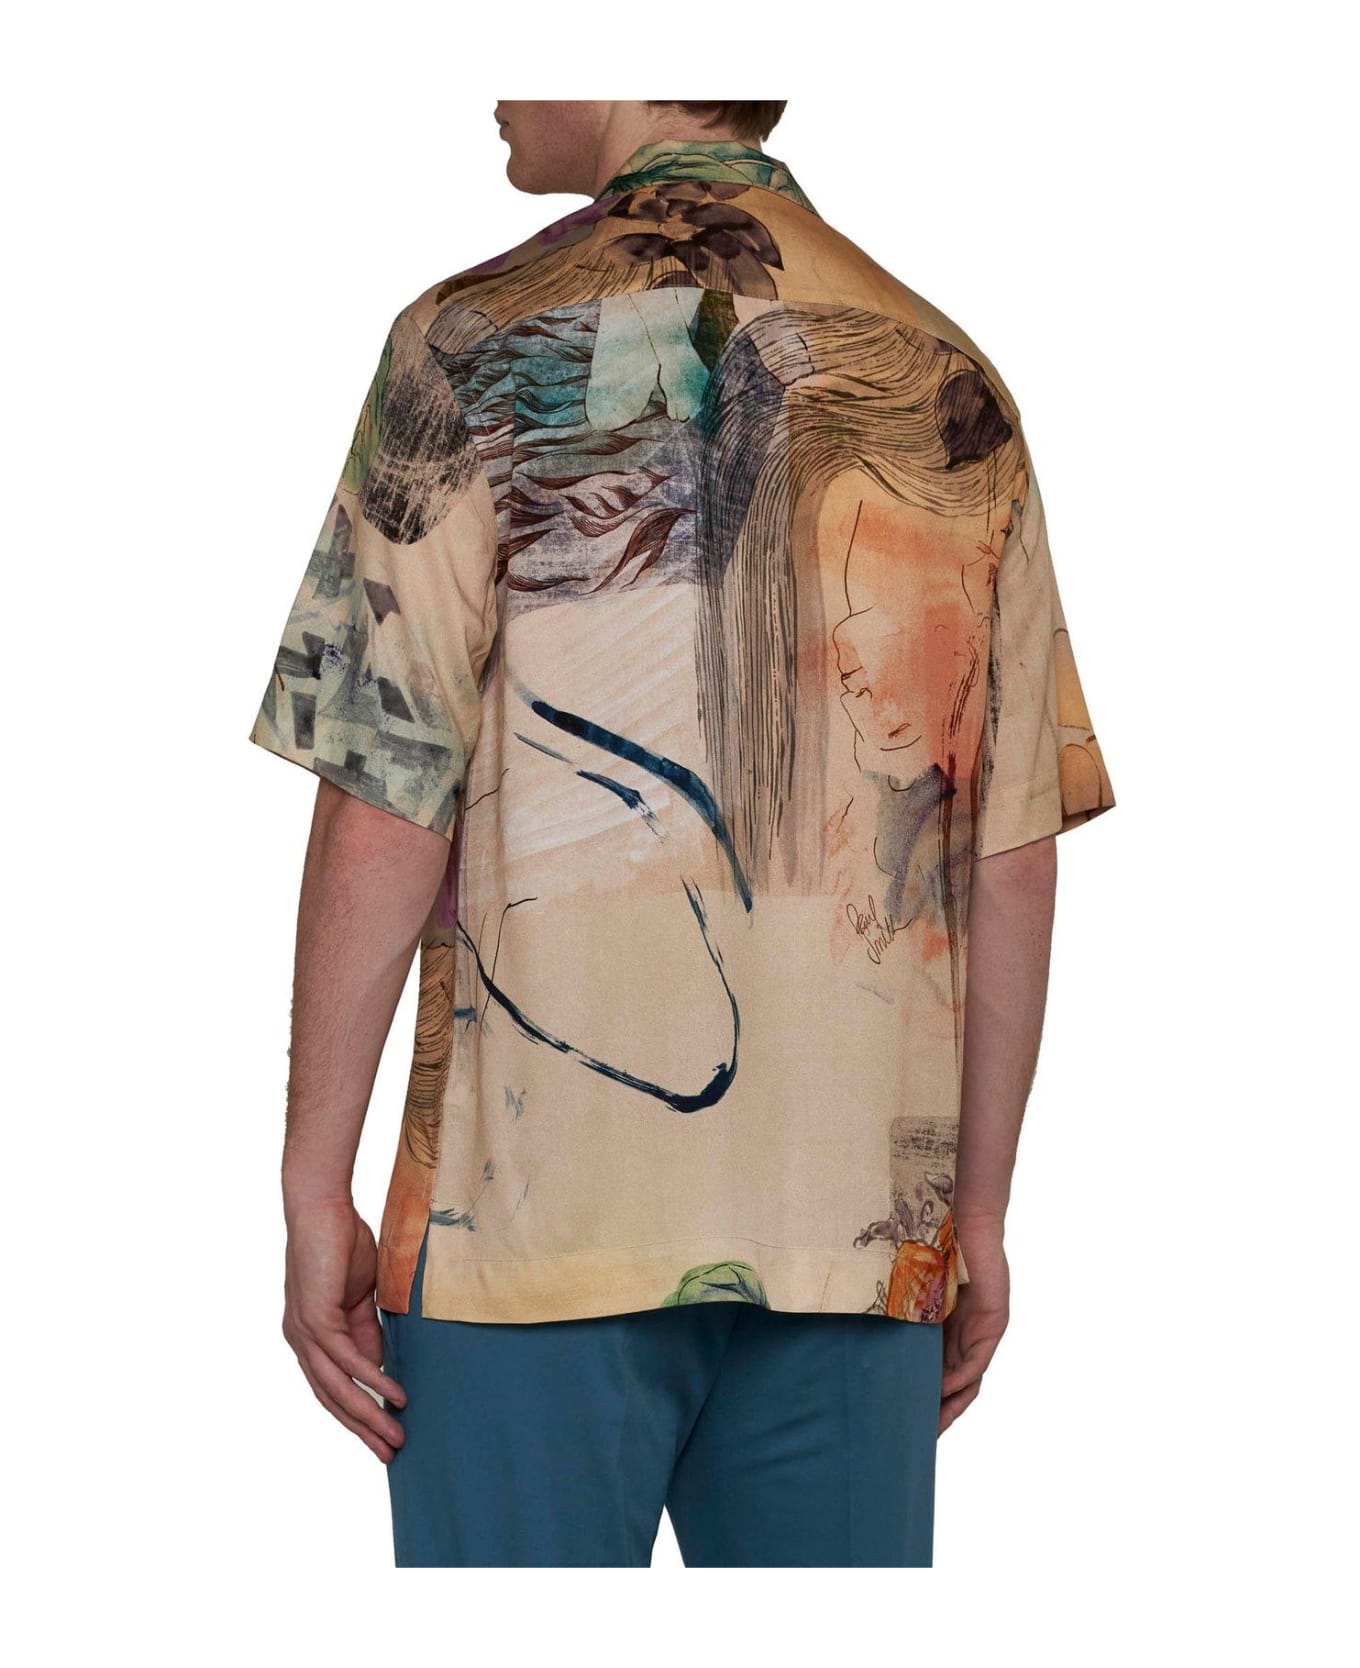 Paul Smith Graphic Printed Short-sleeved Shirt - BEIGE